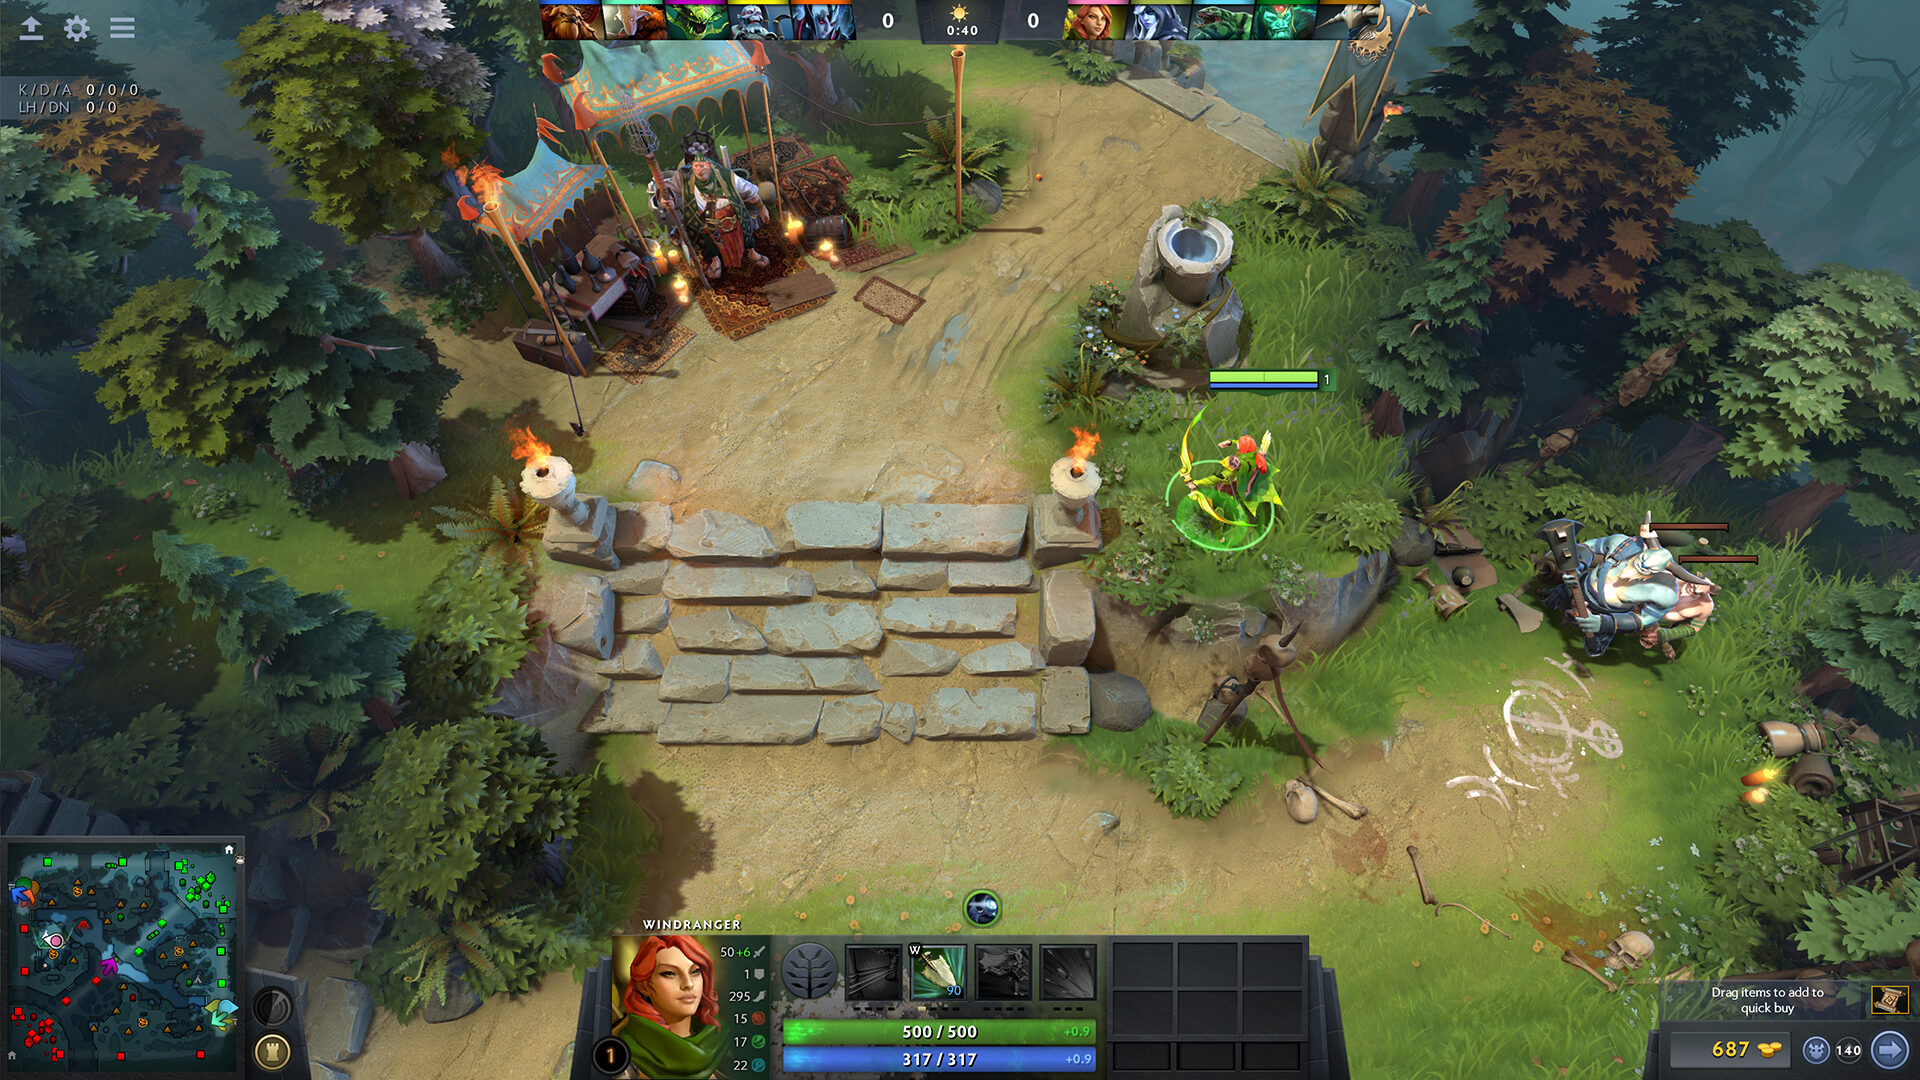 dota 2 honey pot trap exposes amp bans 40k cheaters that have tapped into the info 23022302